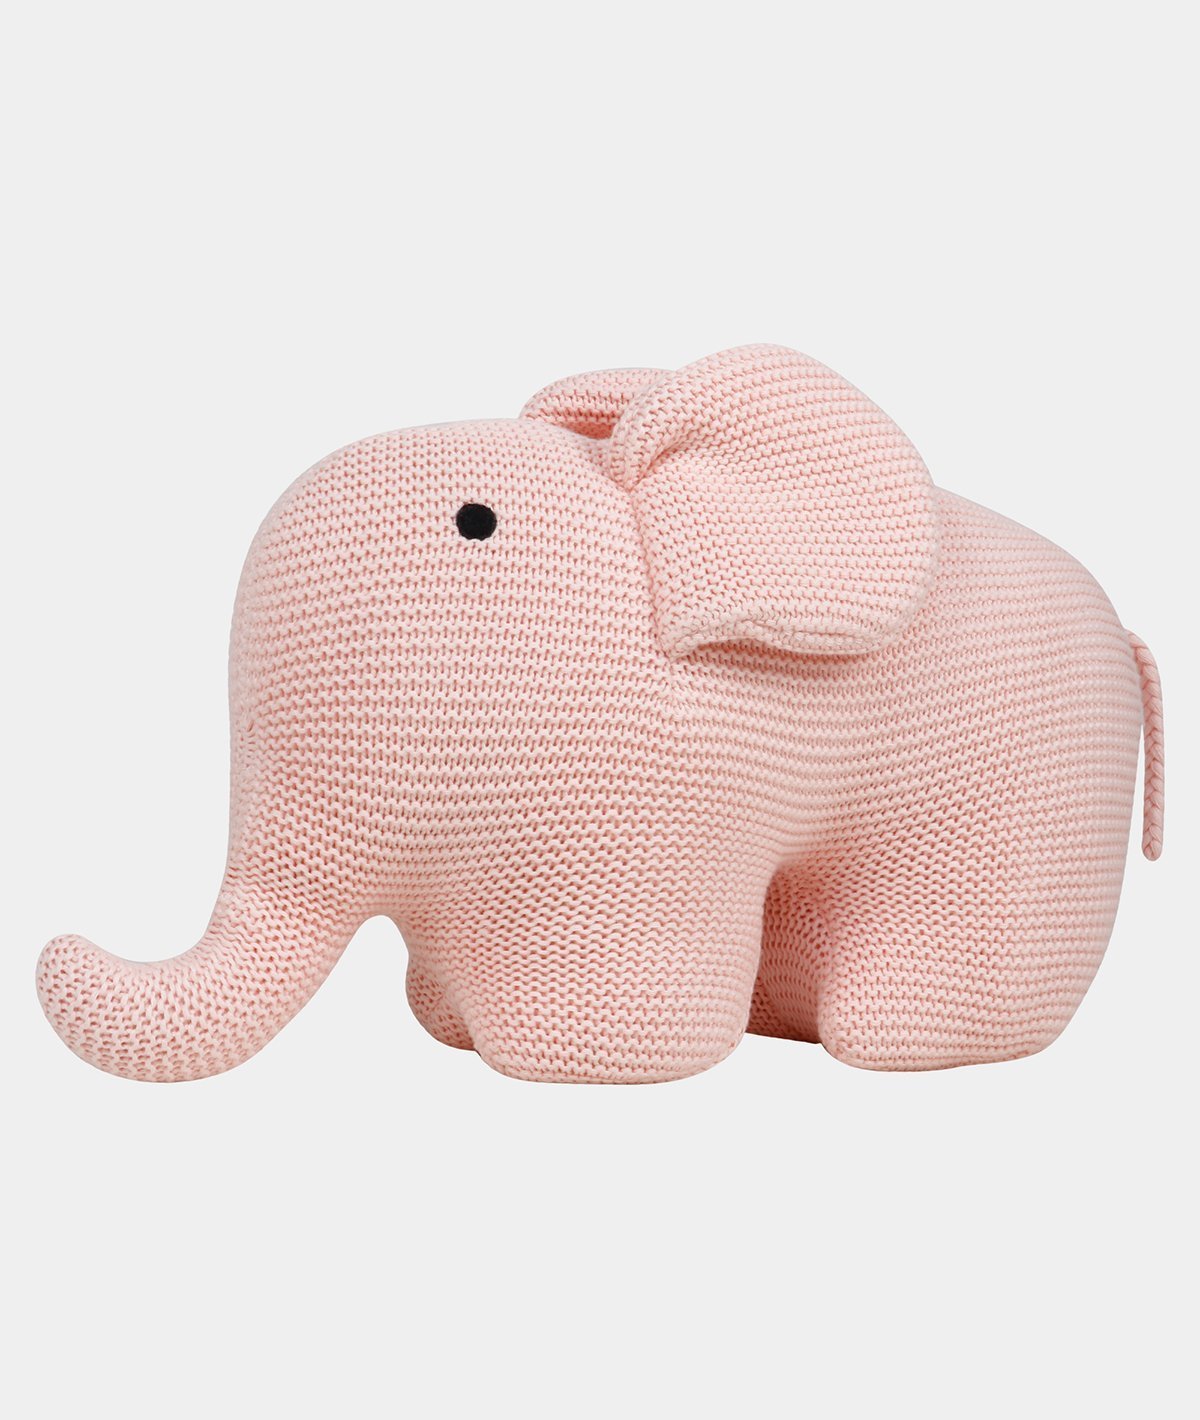 Elephant - Misty Rose 100% Cotton Knitted Stuffed Soft Toy for Babies / Kids